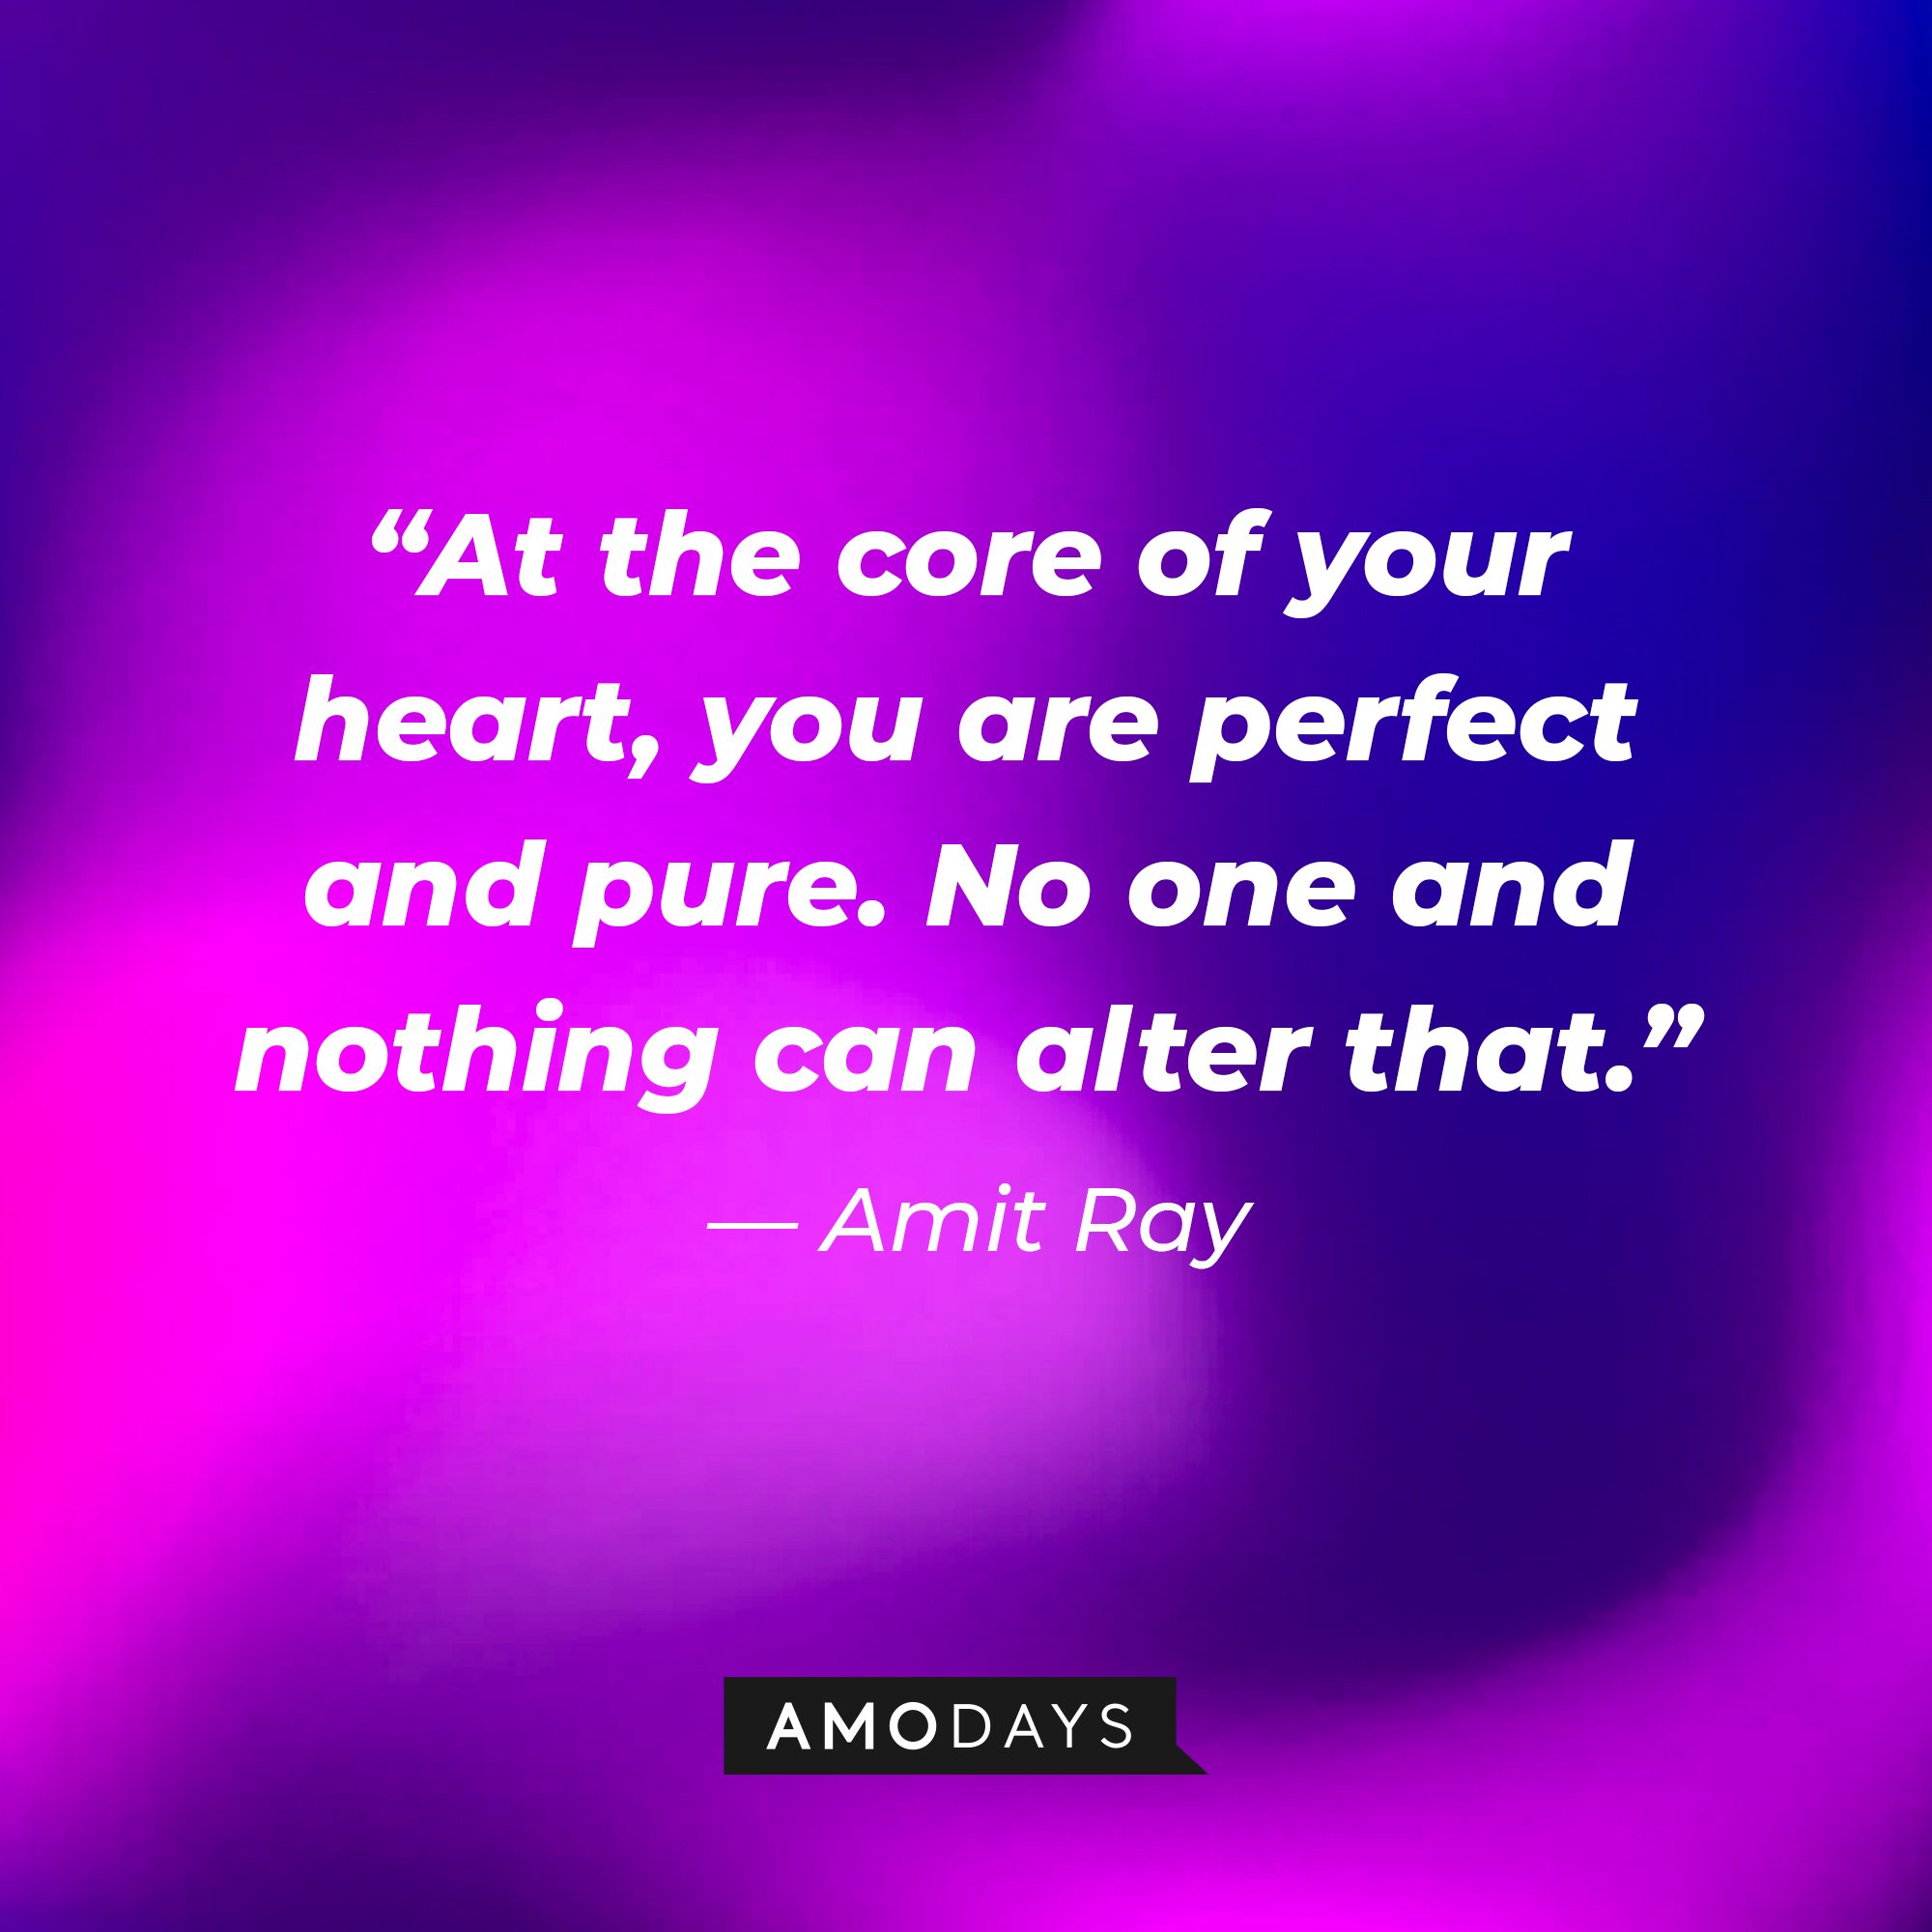 Amit Ray’s quote: “At the core of your heart, you are perfect and pure. No one and nothing can alter that.” | Image: AmoDays